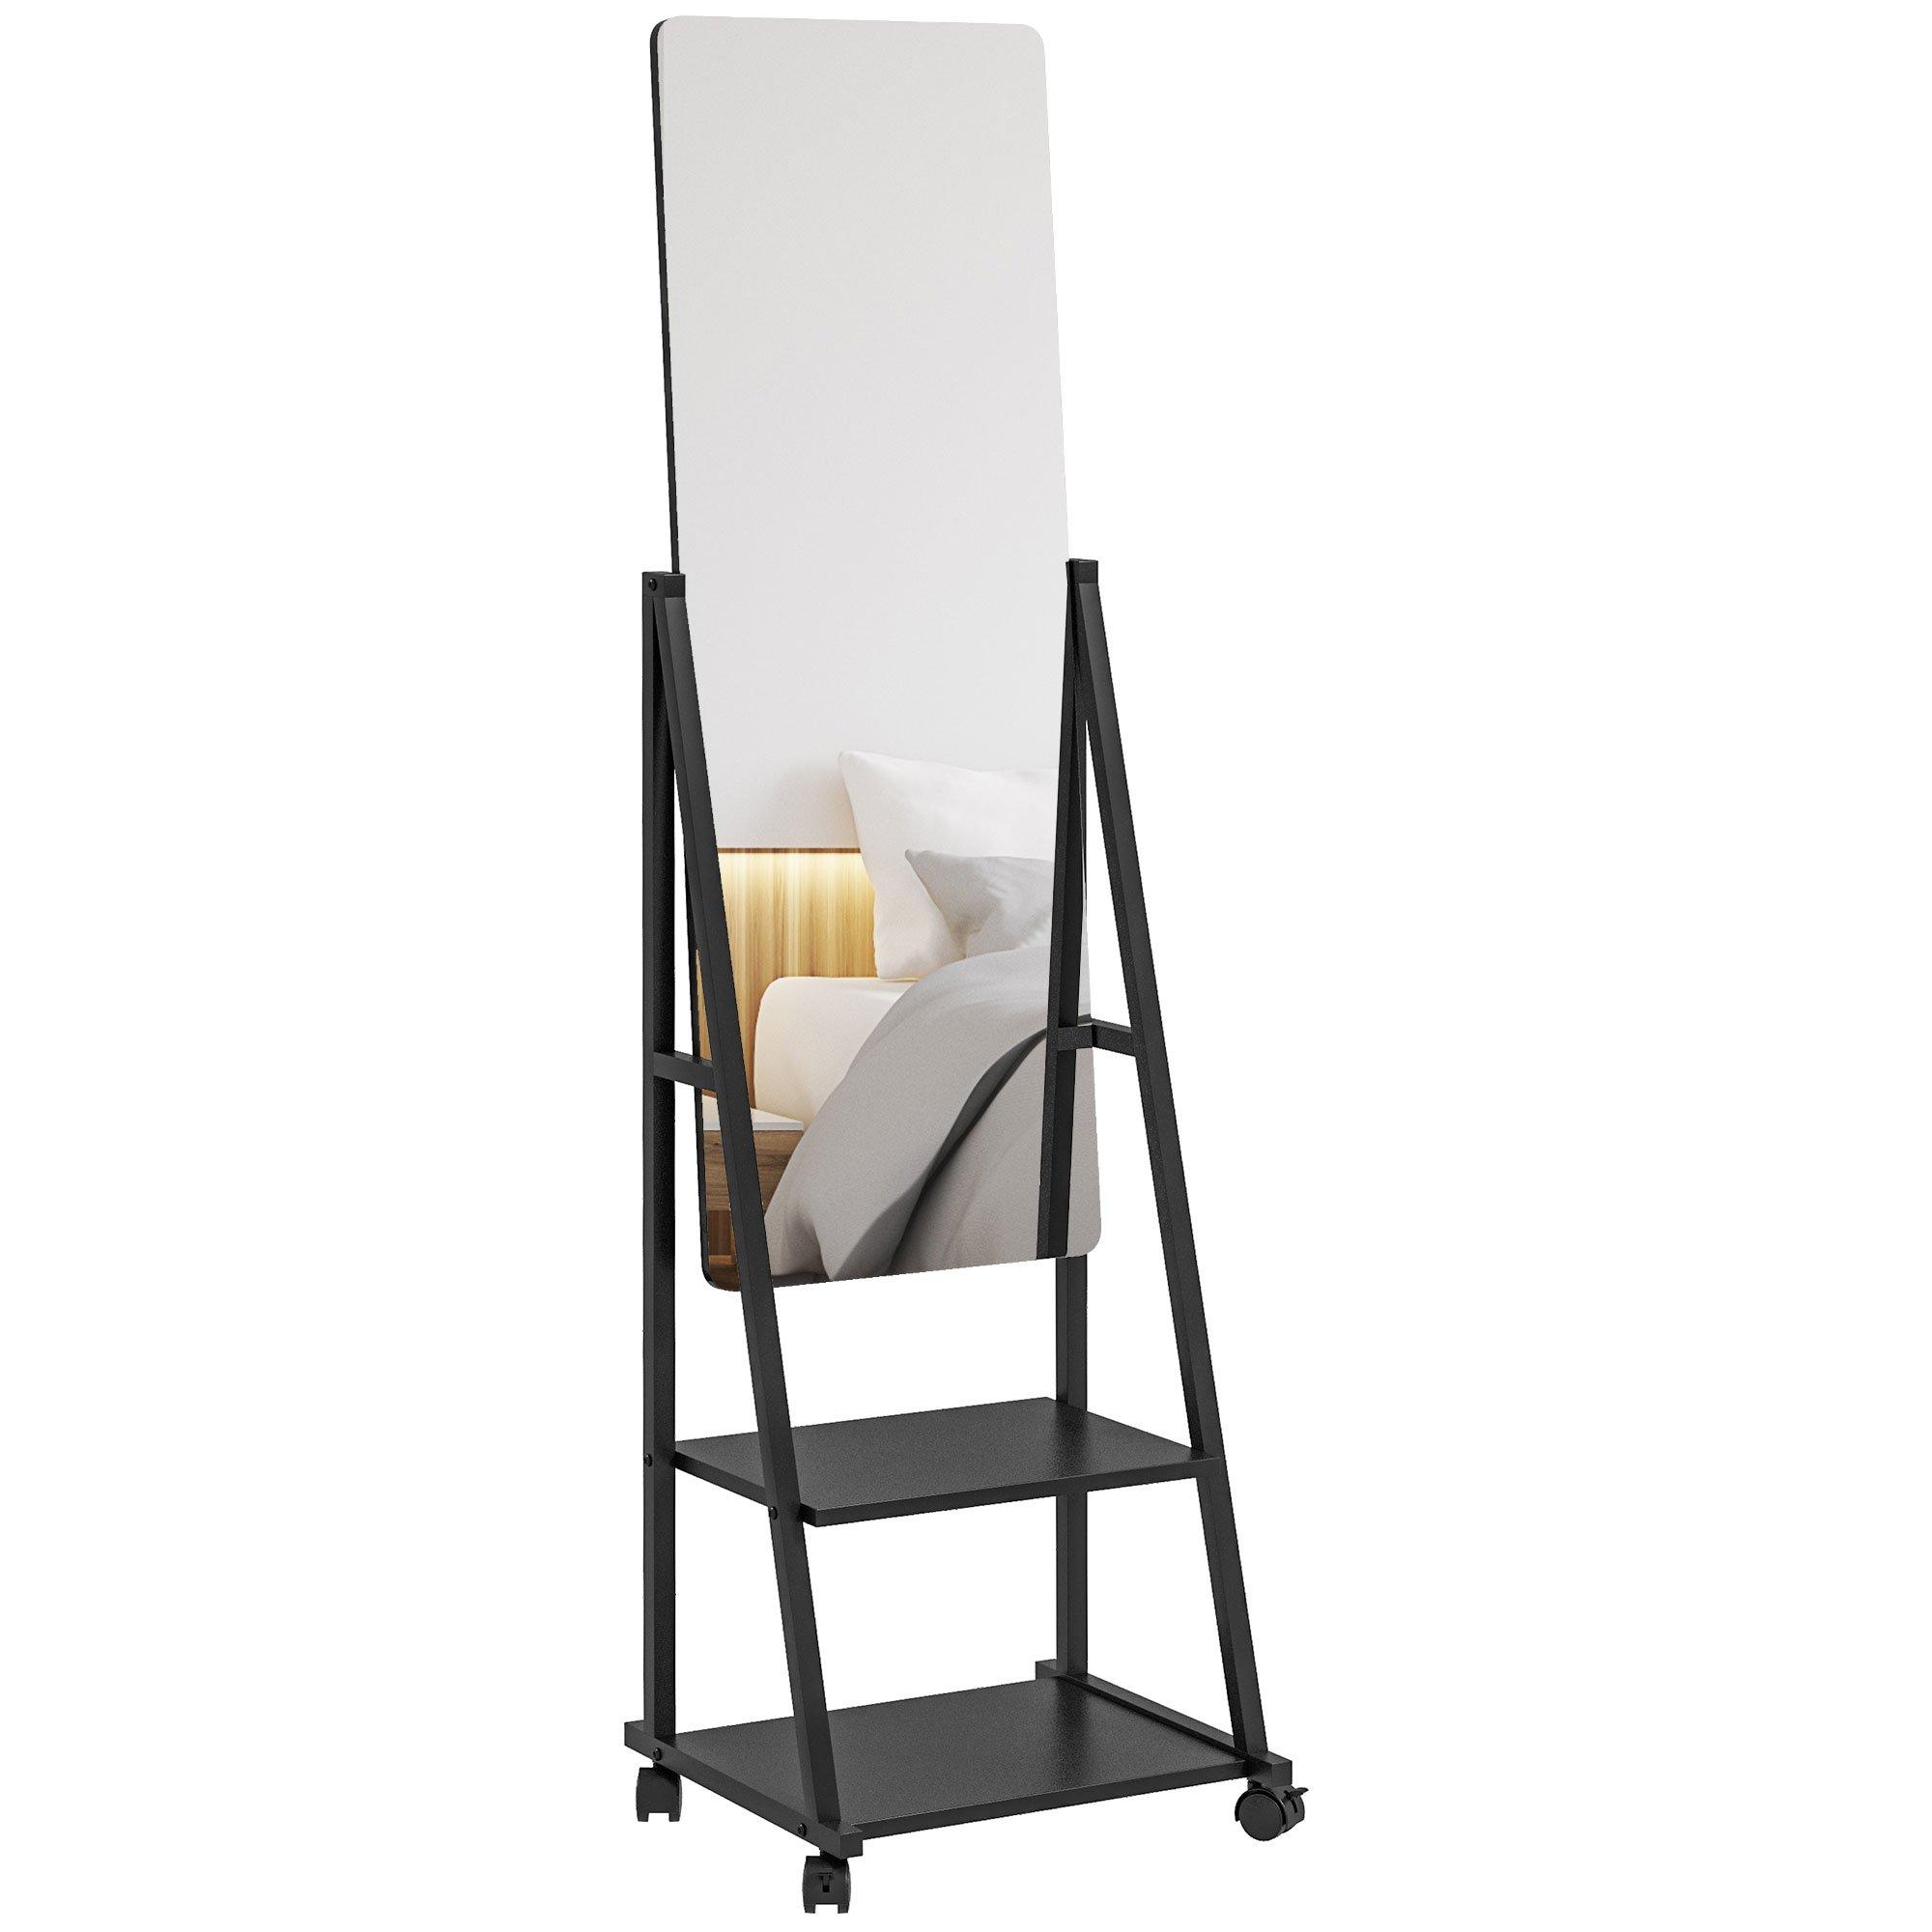 Movable Full Length Mirror Adjustable Full Body Mirror with 2 Shelves